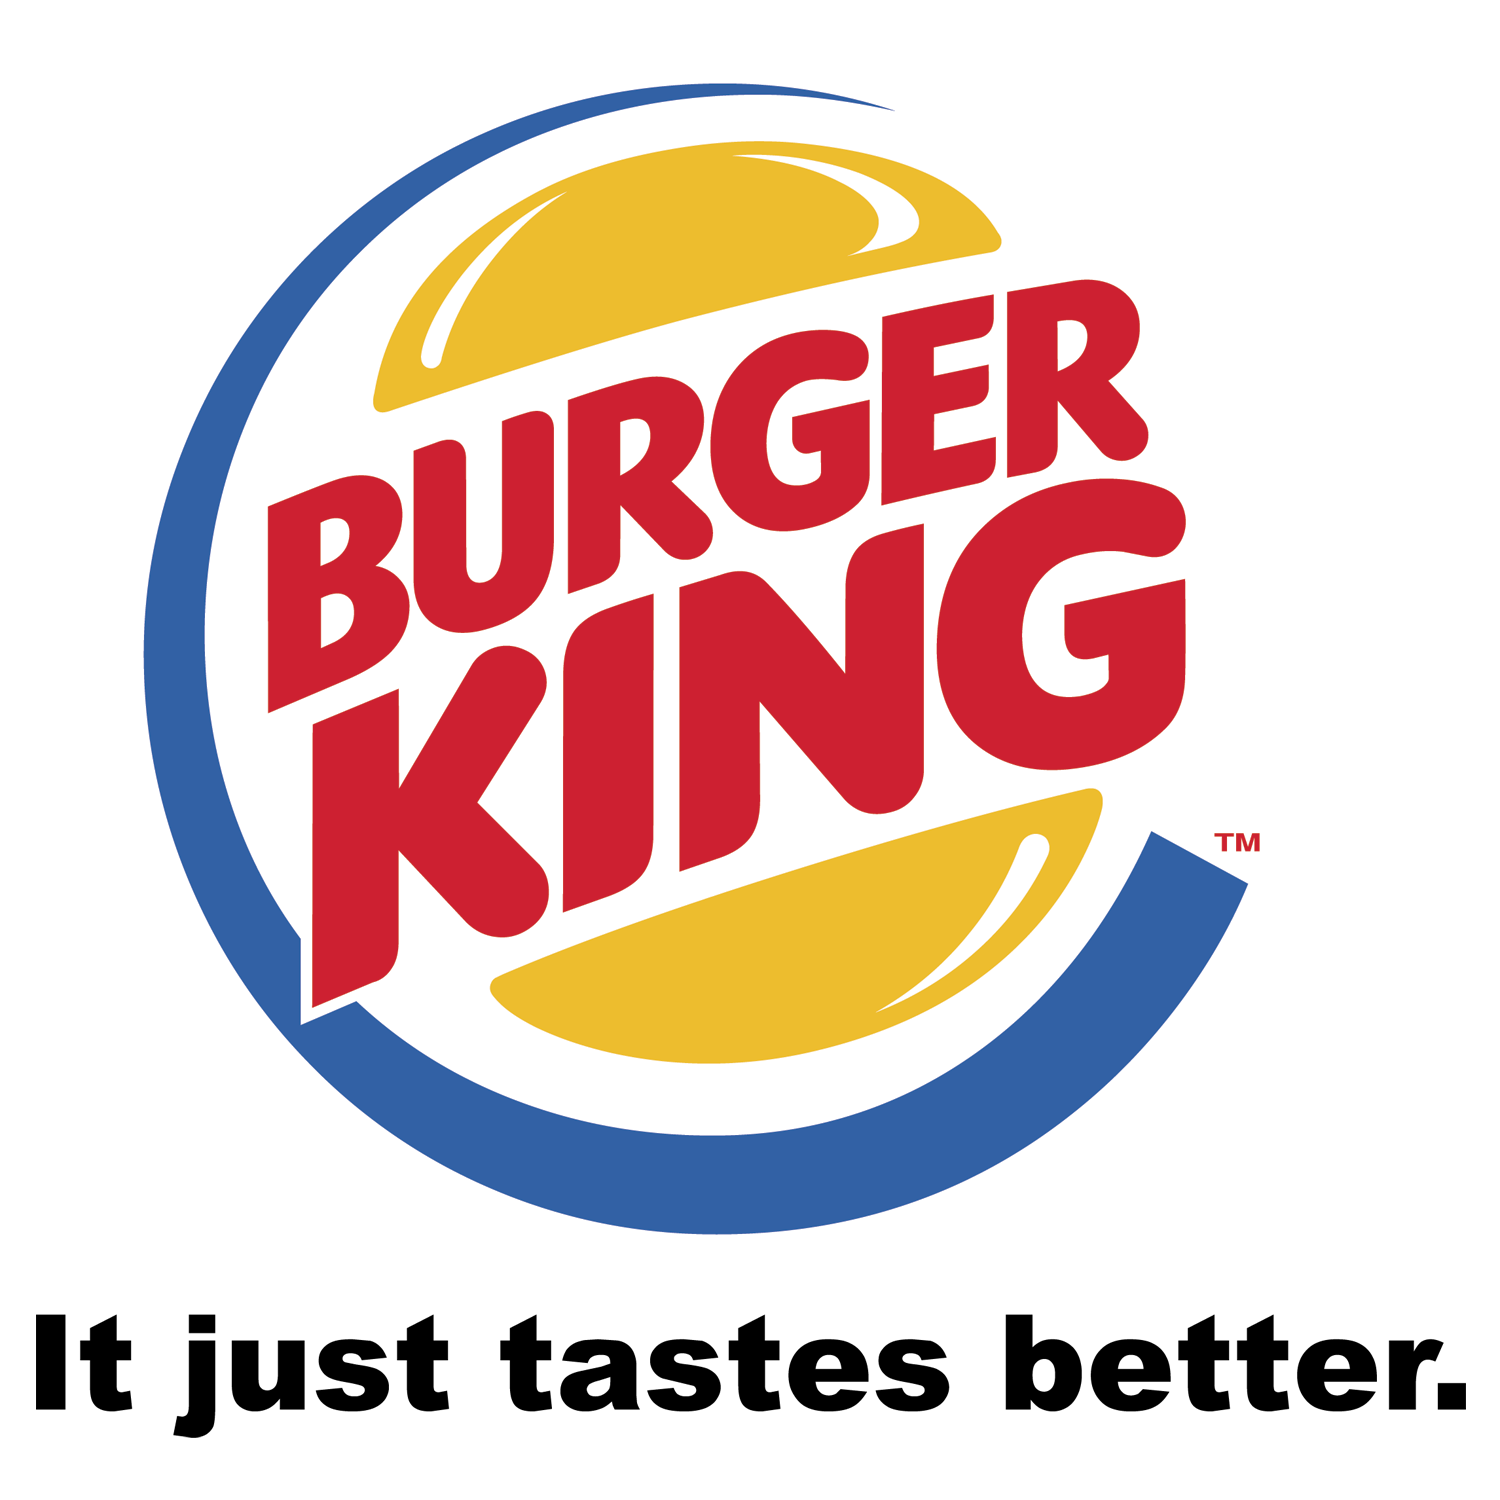 You Can Download Burger King Logo Design Below In Vector And Png Format With Transparent Background. - Burger King, Transparent background PNG HD thumbnail